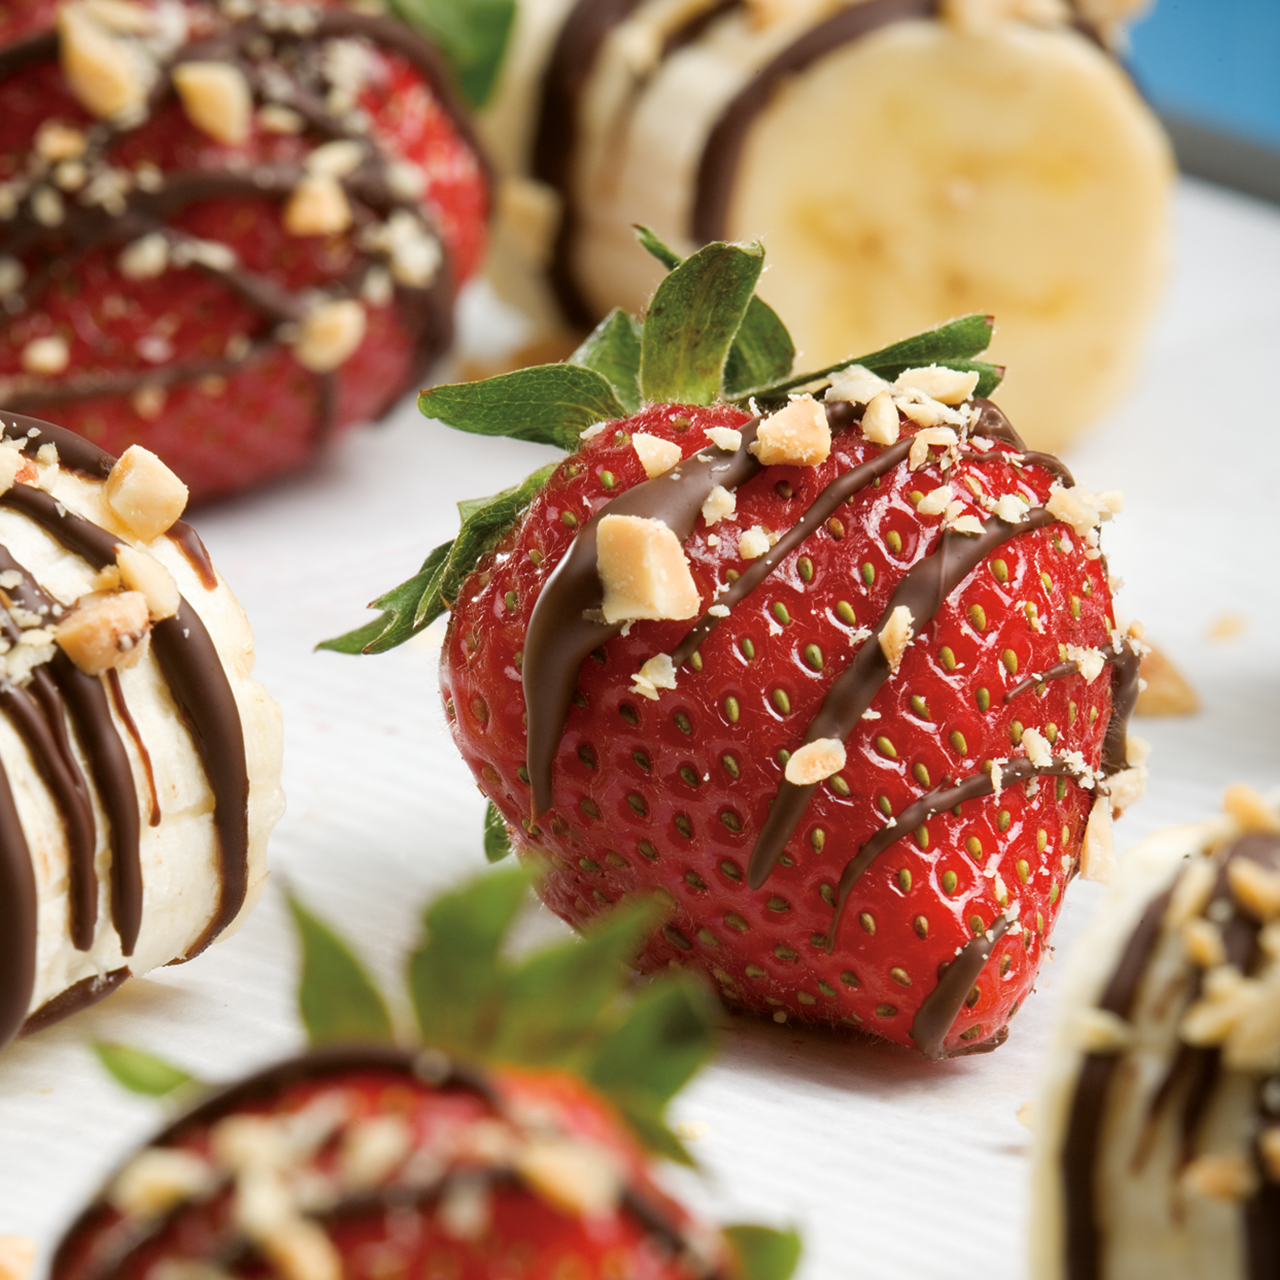 A picture of chocolate covered strawberries with crushed nuts on top.